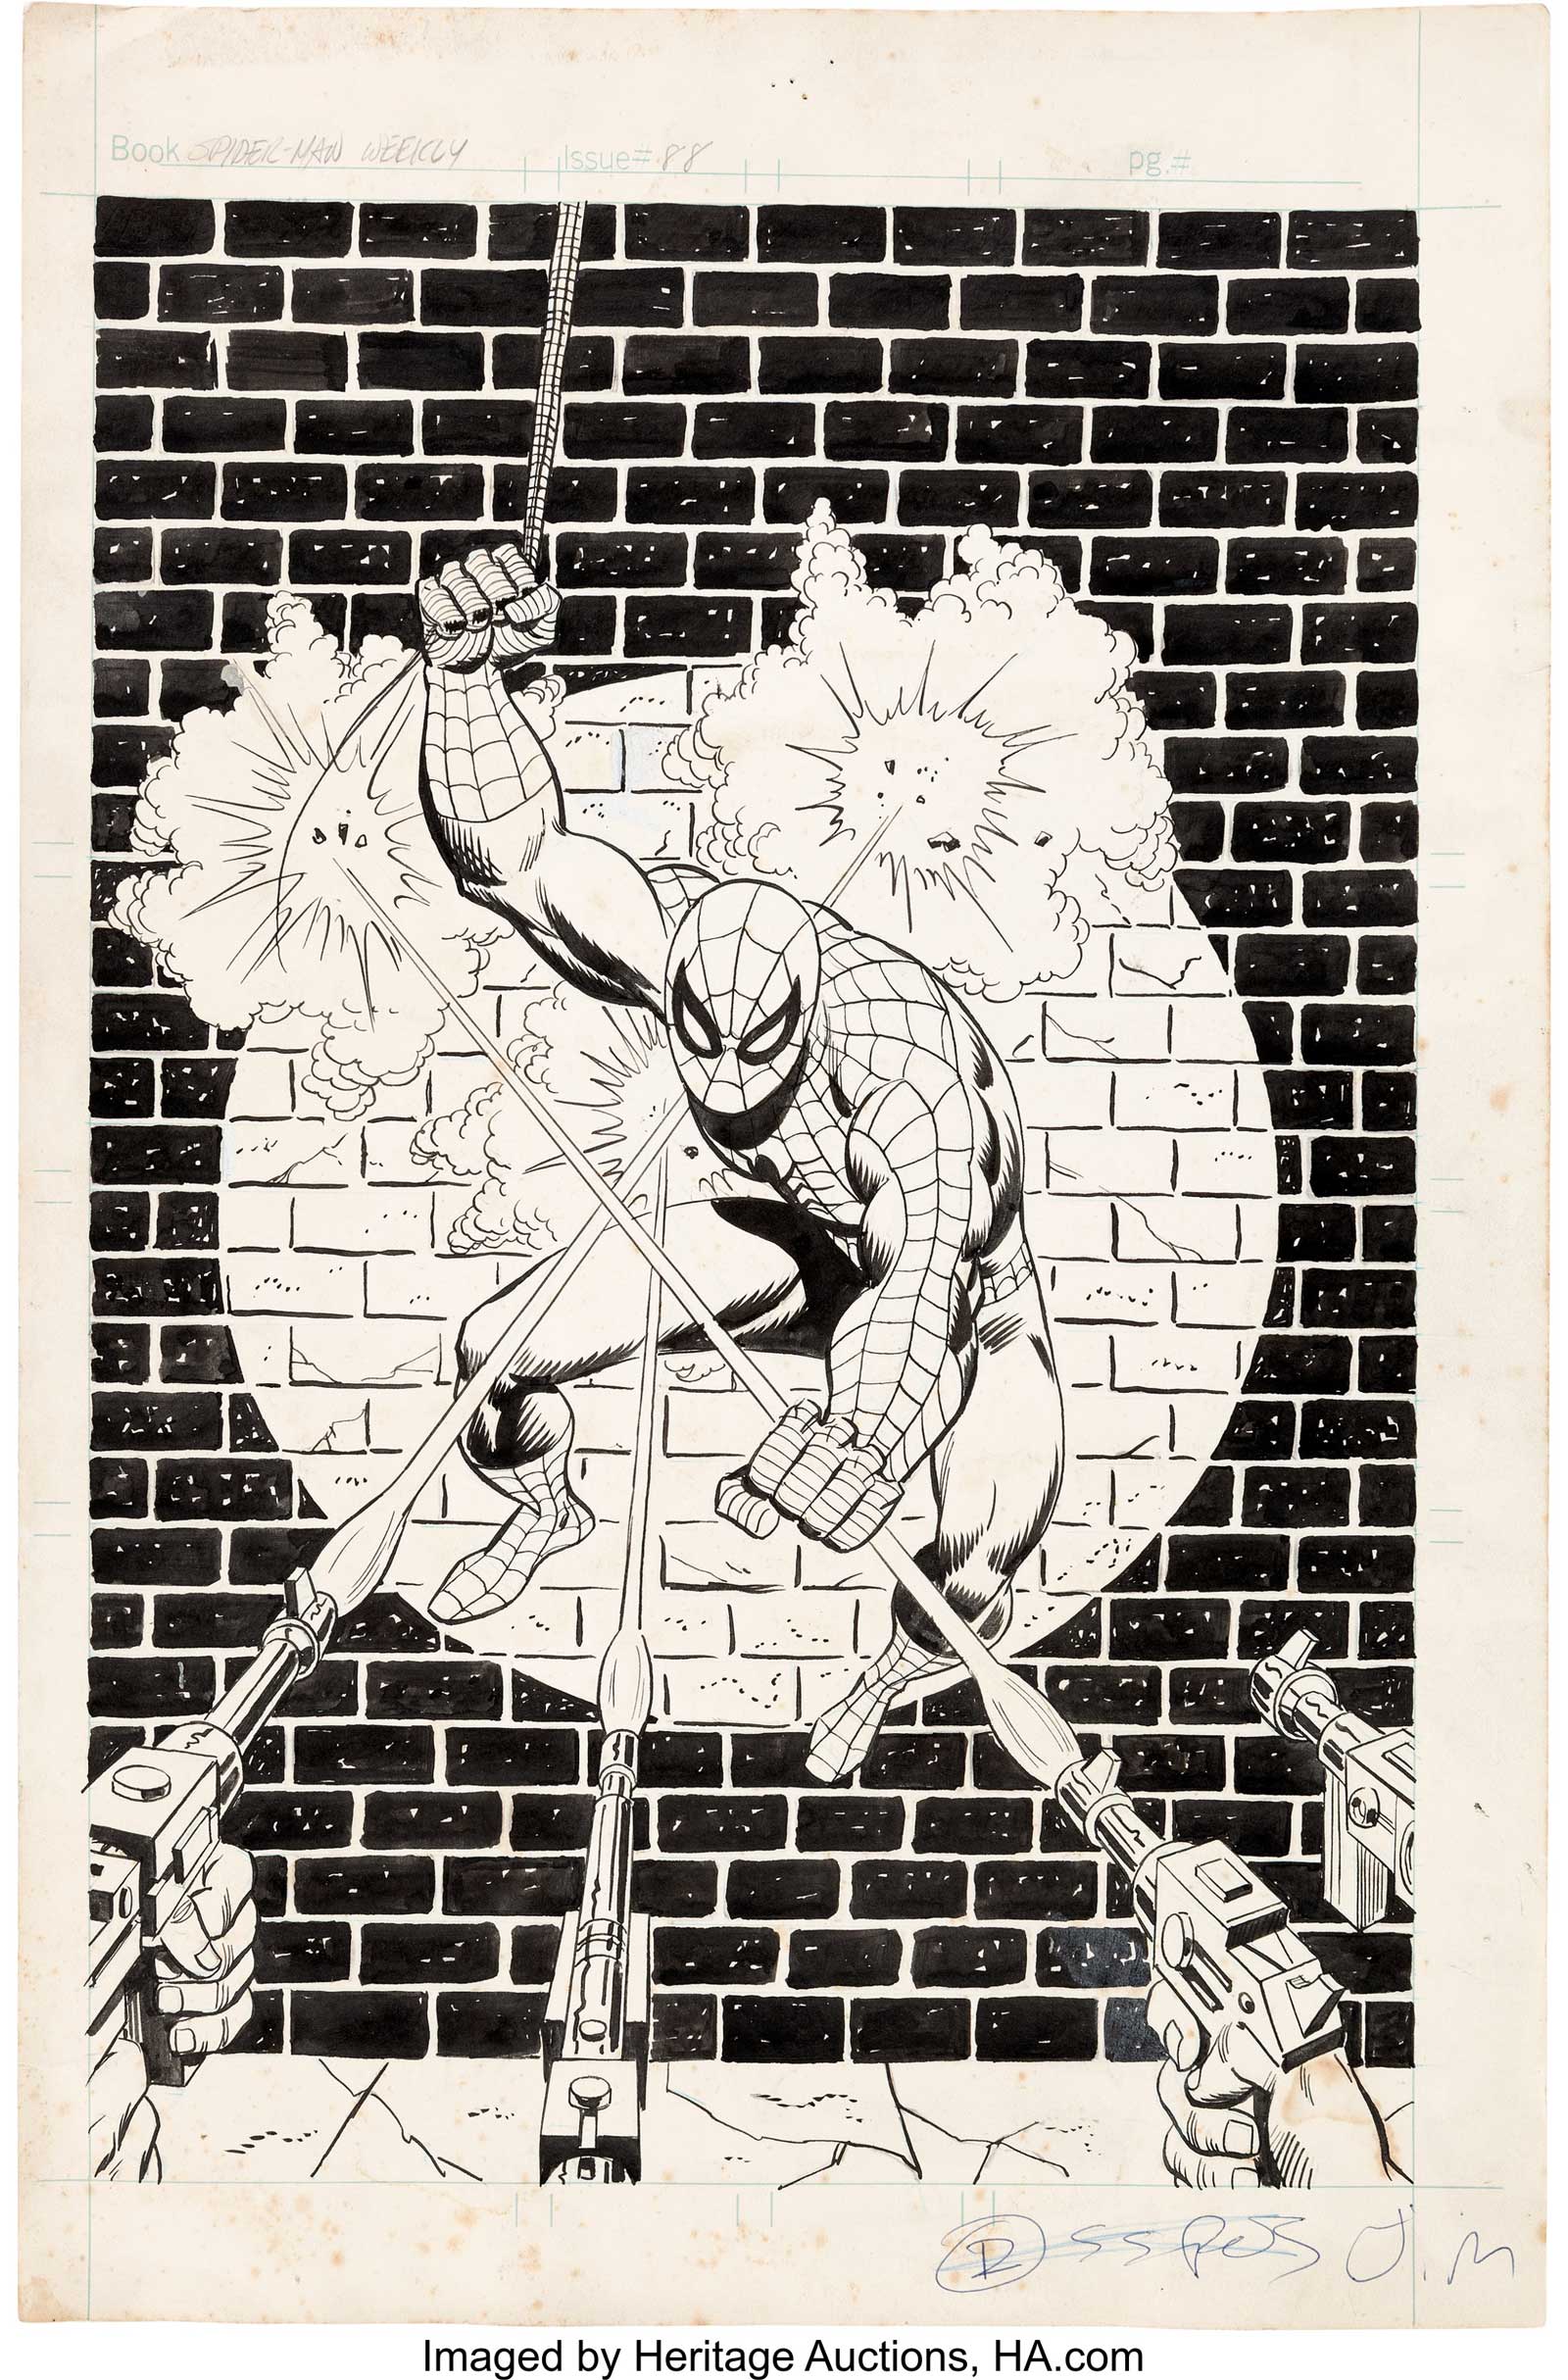 Sal Buscema and Mike Esposito (art team attributed) Spider-Man Comics Weekly #88 Cover, published in 1974. A great original cover for the UK reprint of Amazing Spider-Man #70.